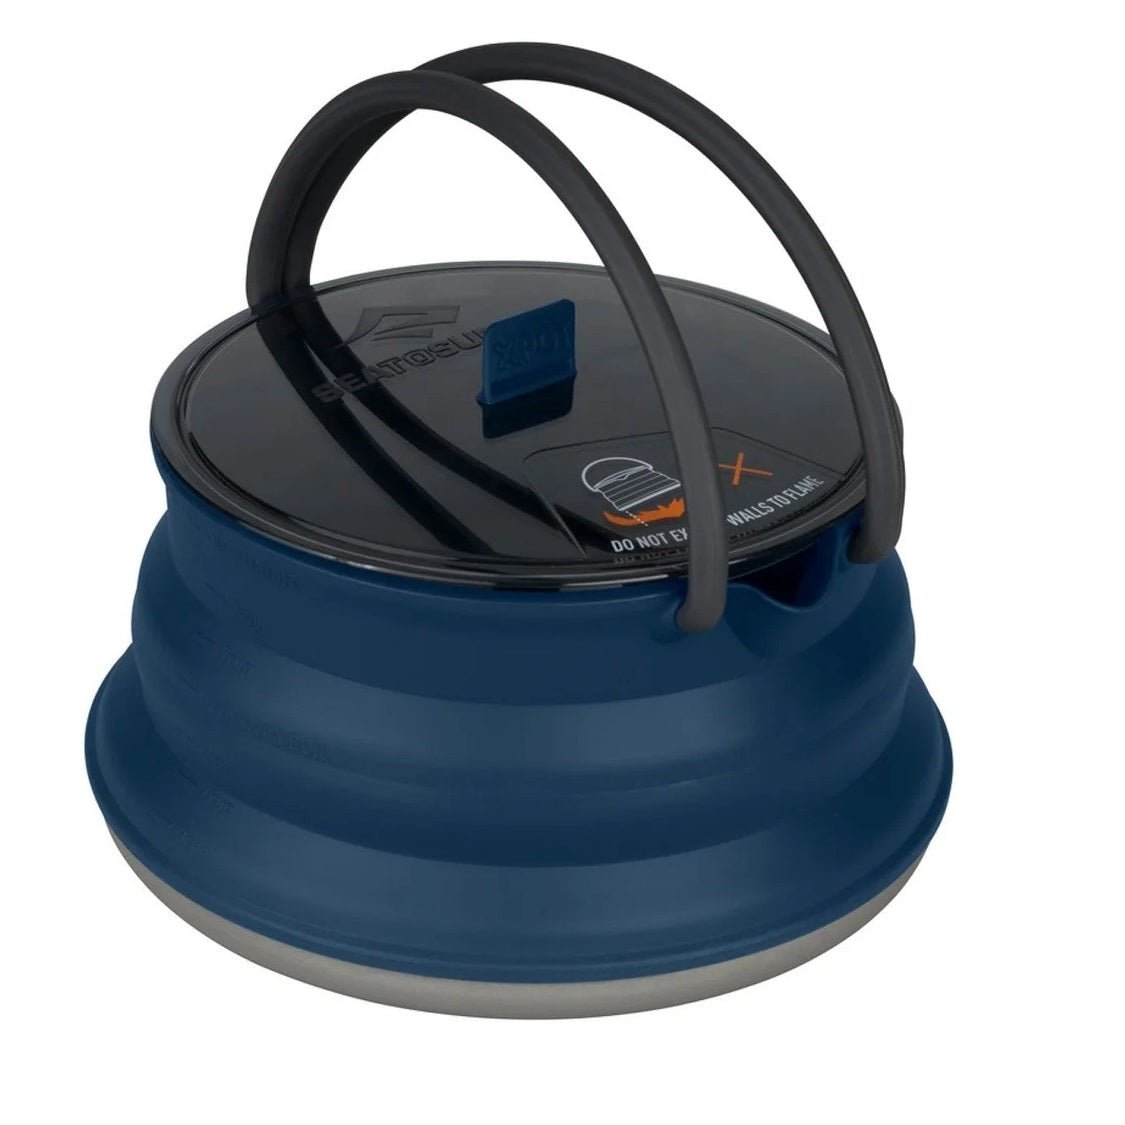 Sea to Summit - X-POT KETTLE 2.0 LITRE - NAVY | Sea to Summit | A247 Gear